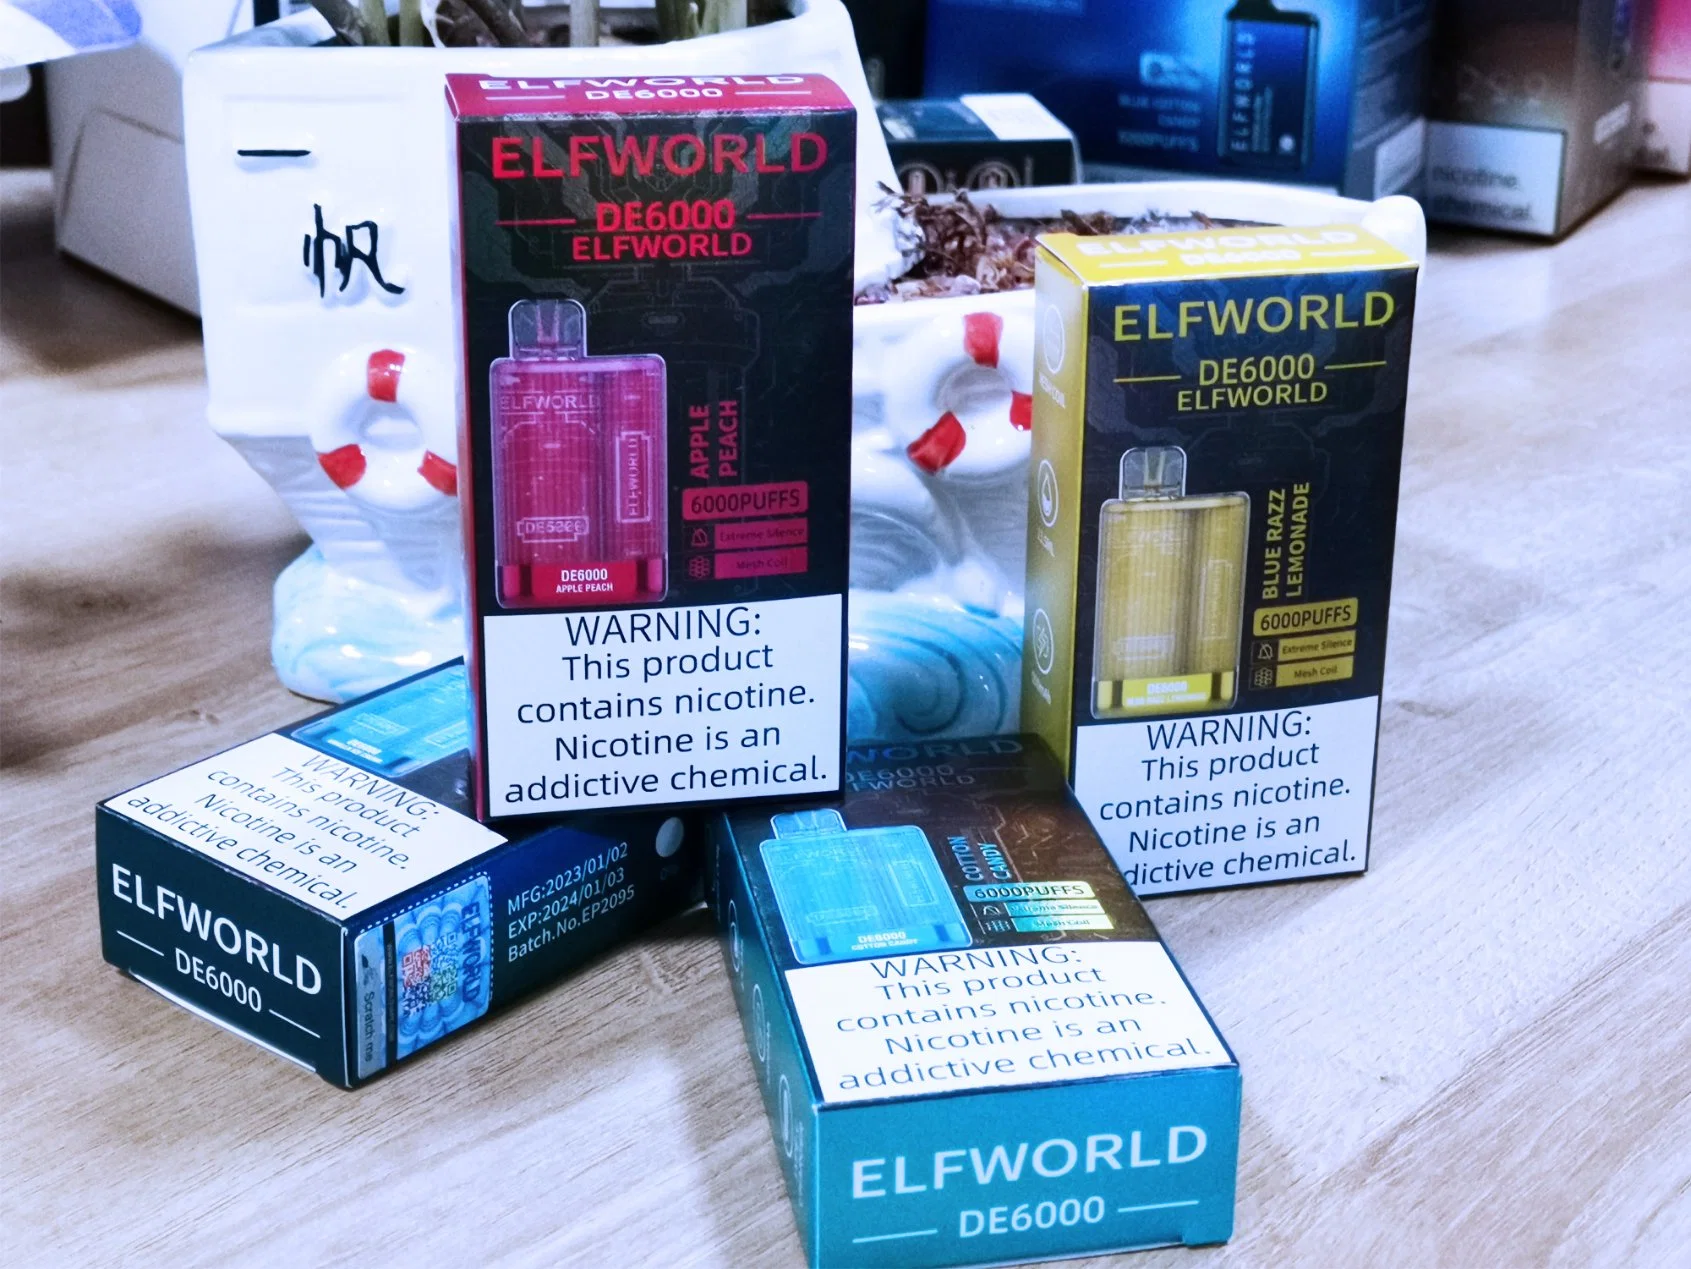 E Cigarette Disposable/Chargeable Vape Zovoo Disposable/Chargeable Vape Elux Legend 3500 Disposable/Chargeable Vape Te6000 Te5000 Puff Vape Elfworld De 6000 Puff 15 Flavor 5%2%0%Nicotin